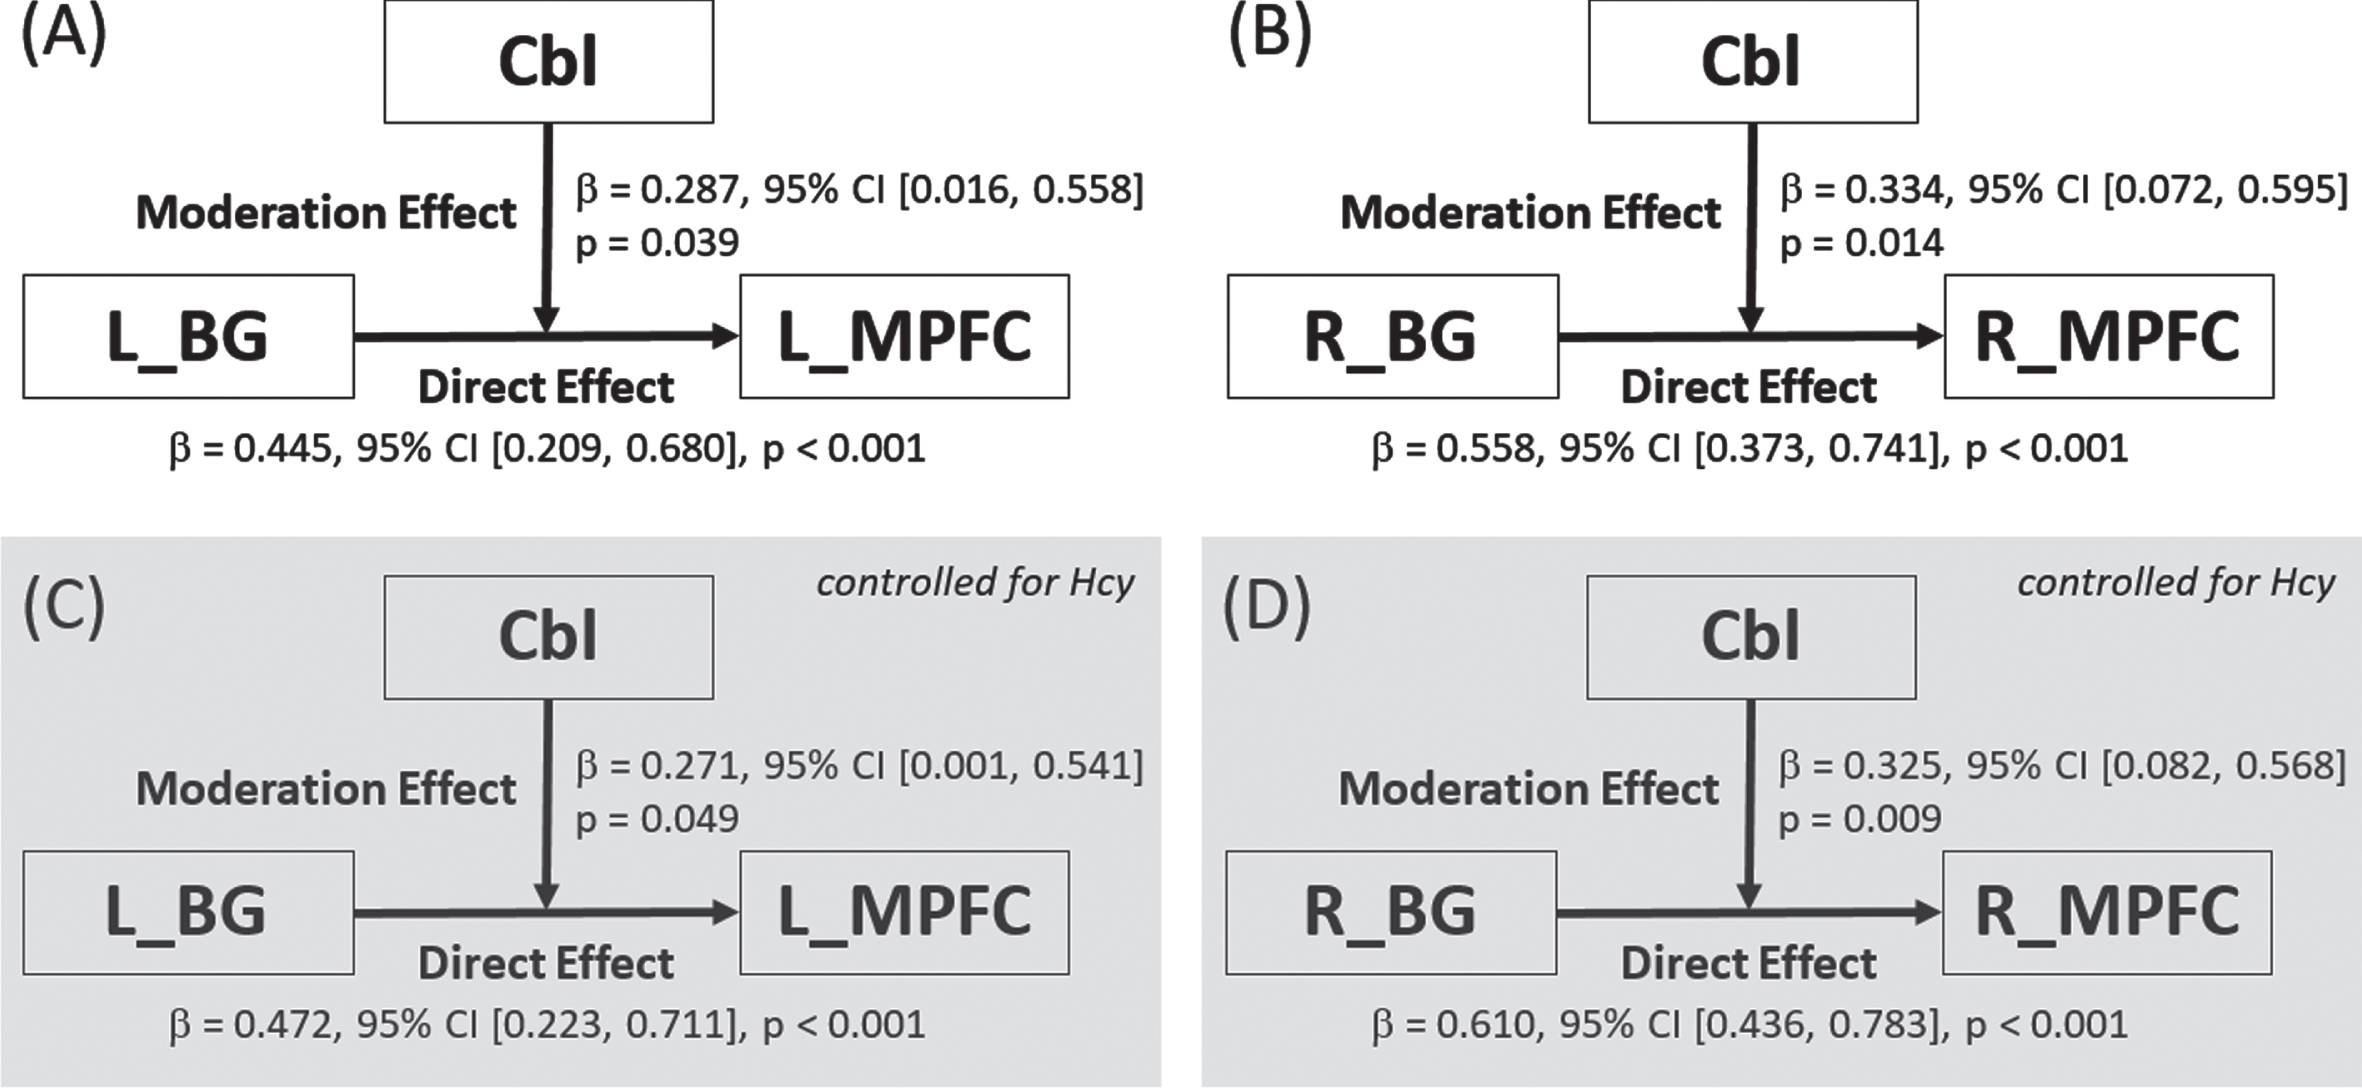 Breakdown of the moderation effect of cobalamin on the cerebral blood flow coupling between basal ganglia and medial prefrontal cortex in subcortical ischemic vascular disease. Moderation effects were found both before (subplots A and B for the left and right hemispheres, respectively) and after (subplots C and D for the left and right hemispheres, respectively) controlling for the effect of homocysteine. Cbl, cobalamin; BG, basal ganglia; MPFC, medial prefrontal cortex; L, left; R, right; CI, confidence interval.